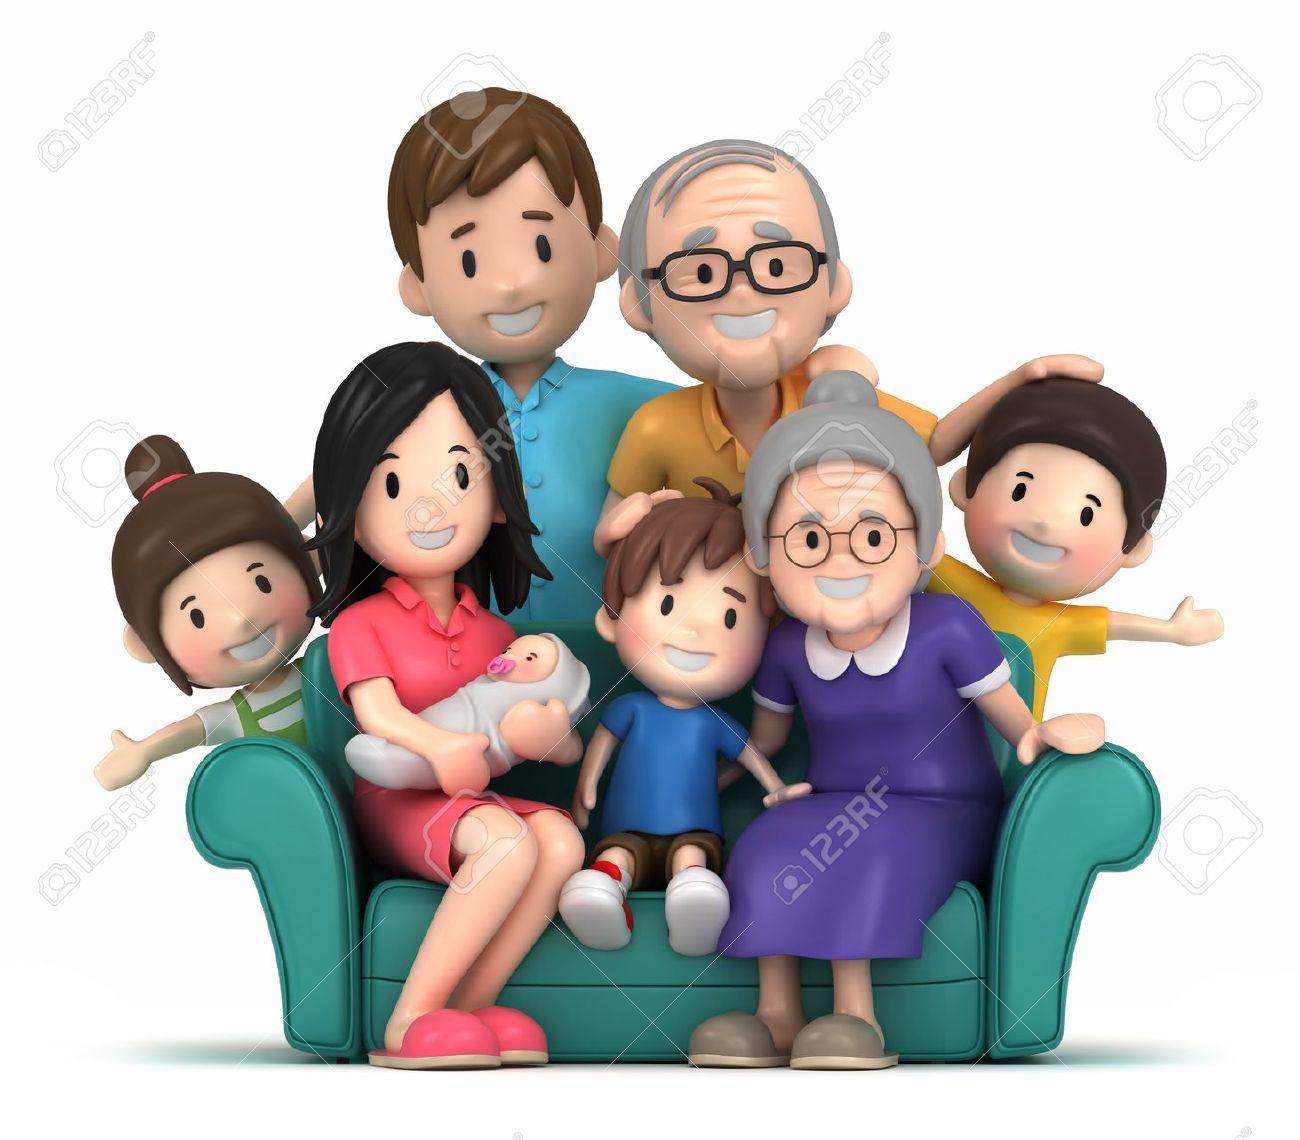 clipart of a happy family - photo #14